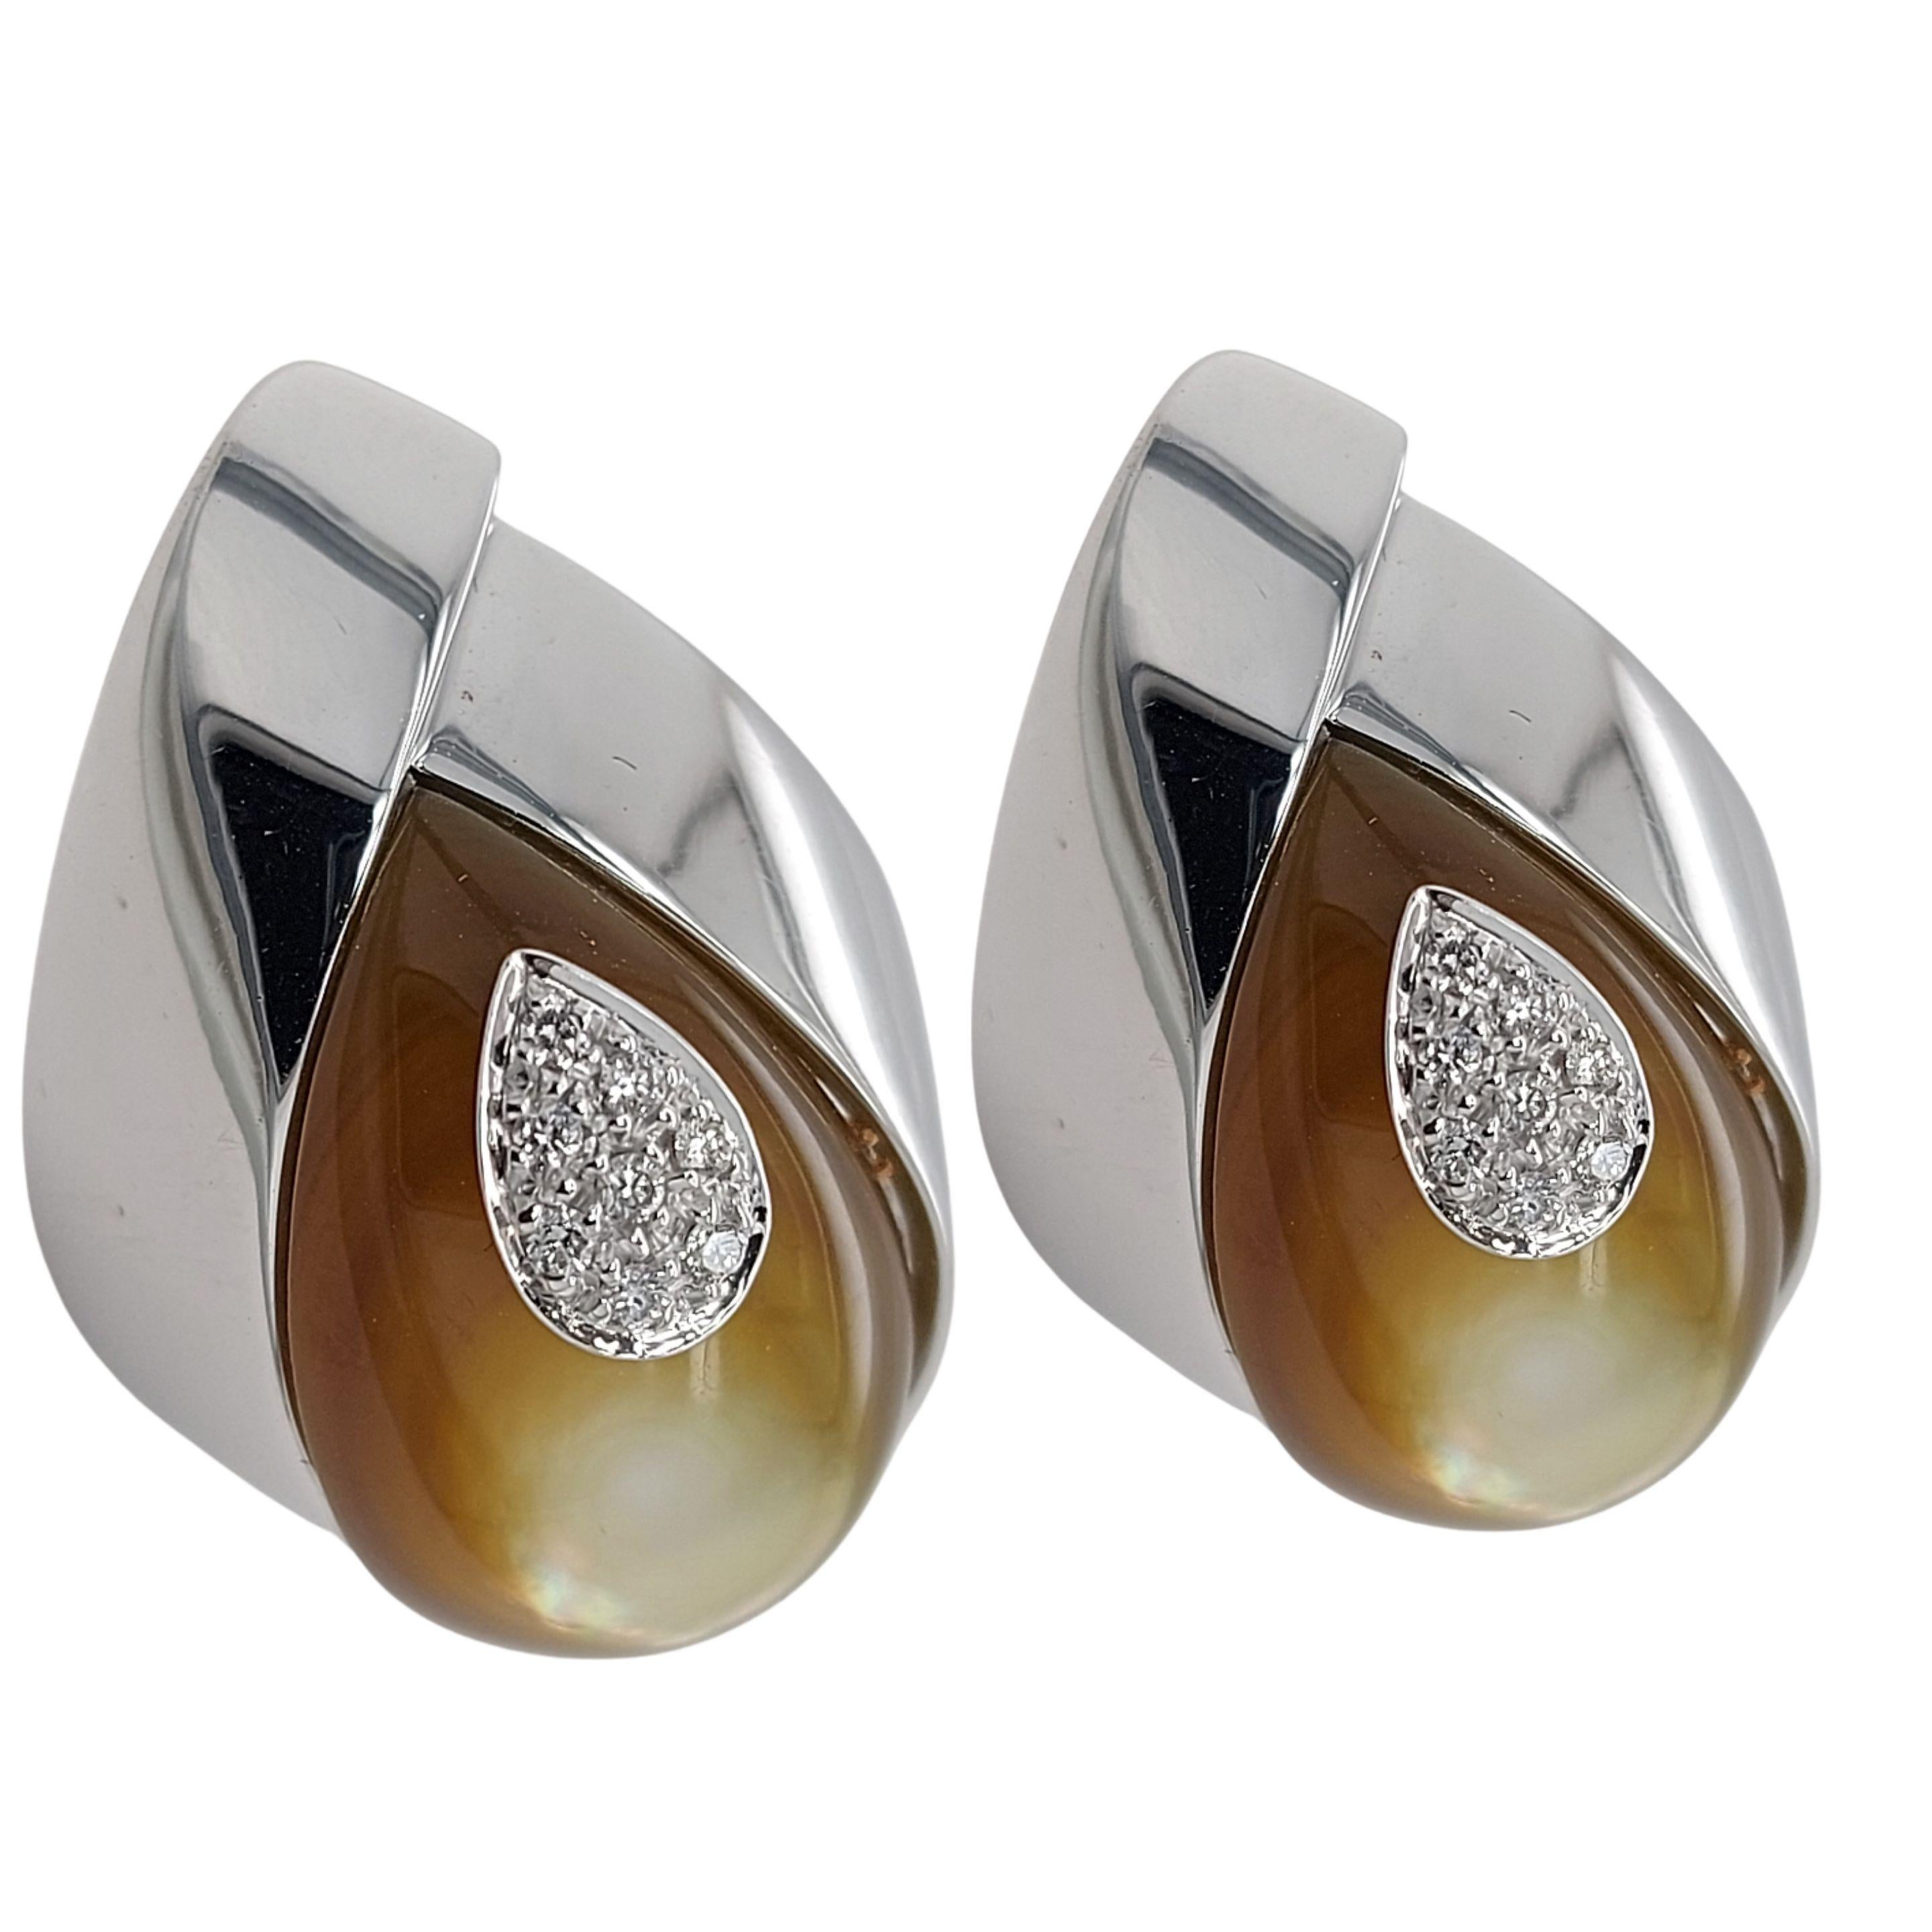 Talento Italiano Earrings In 18kt White Gold With 0.20 Carat Diamonds 

Diamonds: 16 brilliant cut diamonds approx. 0.20ct

Material: 18kt white gold

Measurements: 17.9 x 24.4 mm

Total weight: 16.4 grams / 0,580 oz / 10.6 dwt

